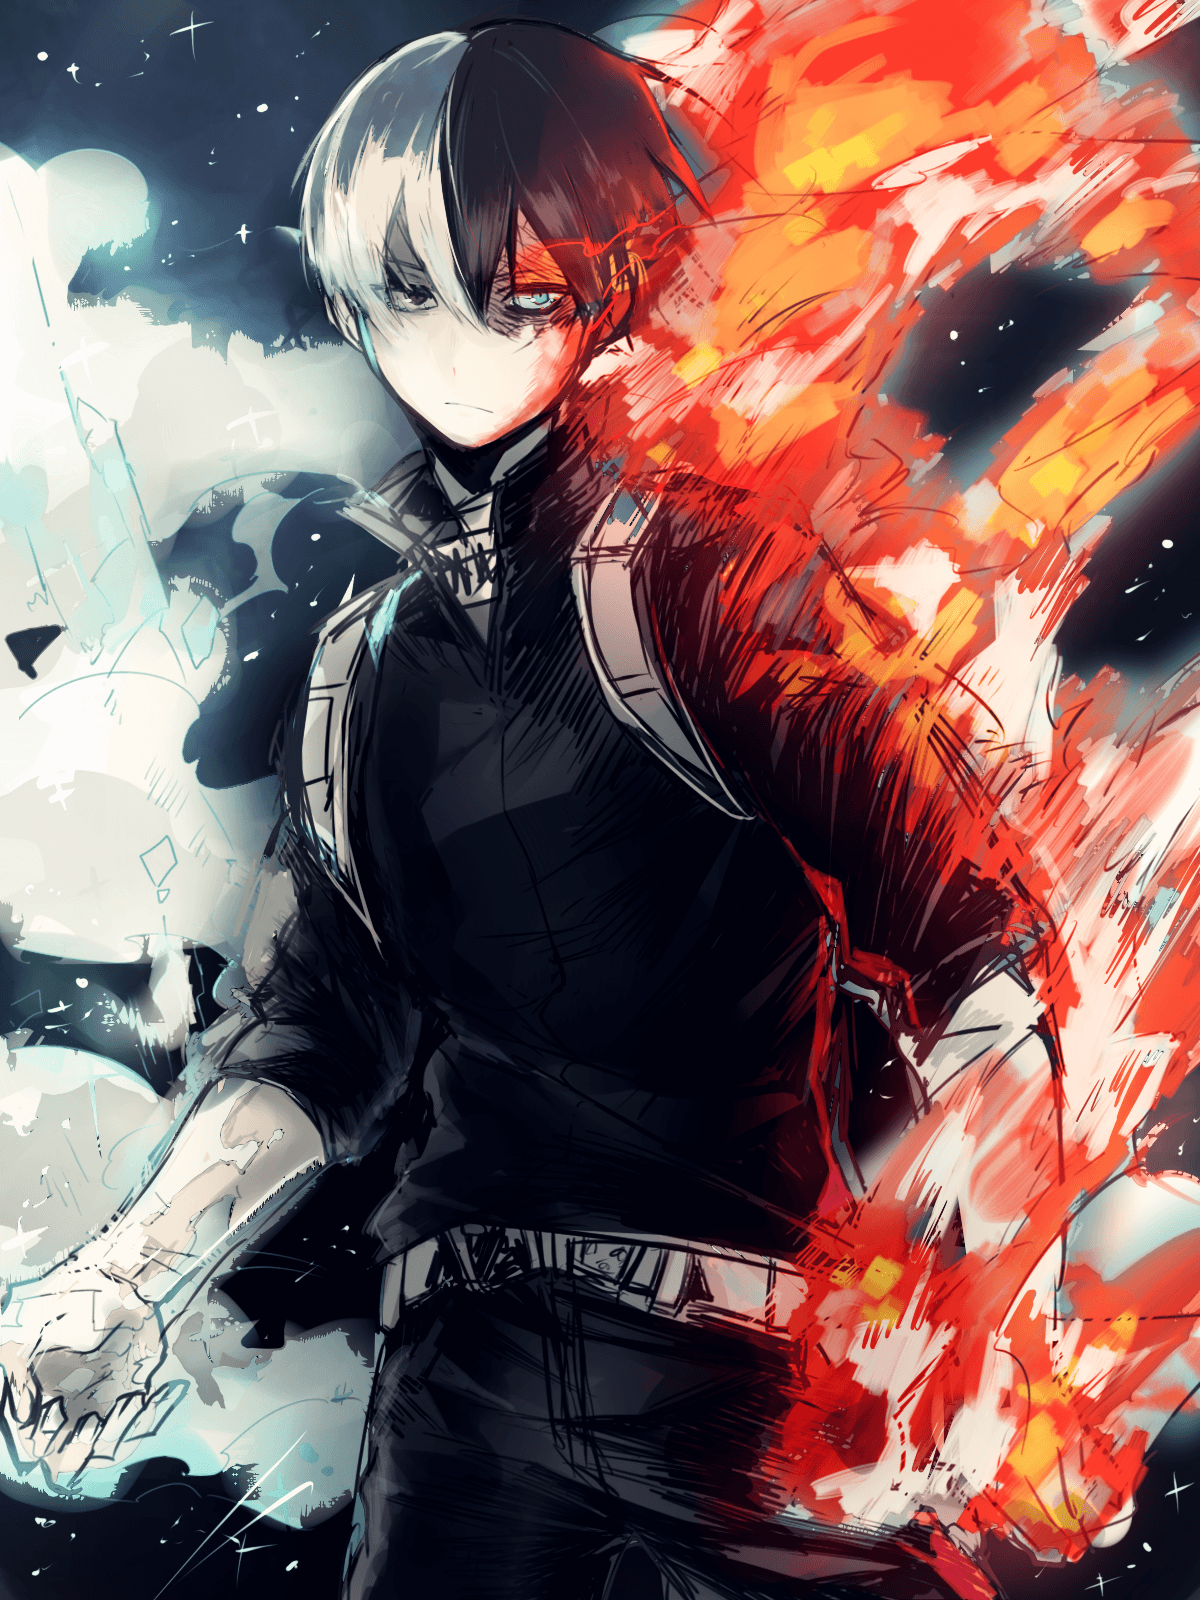 Pictures Of Shoto Todoroki From My Hero Academia Wallpapers